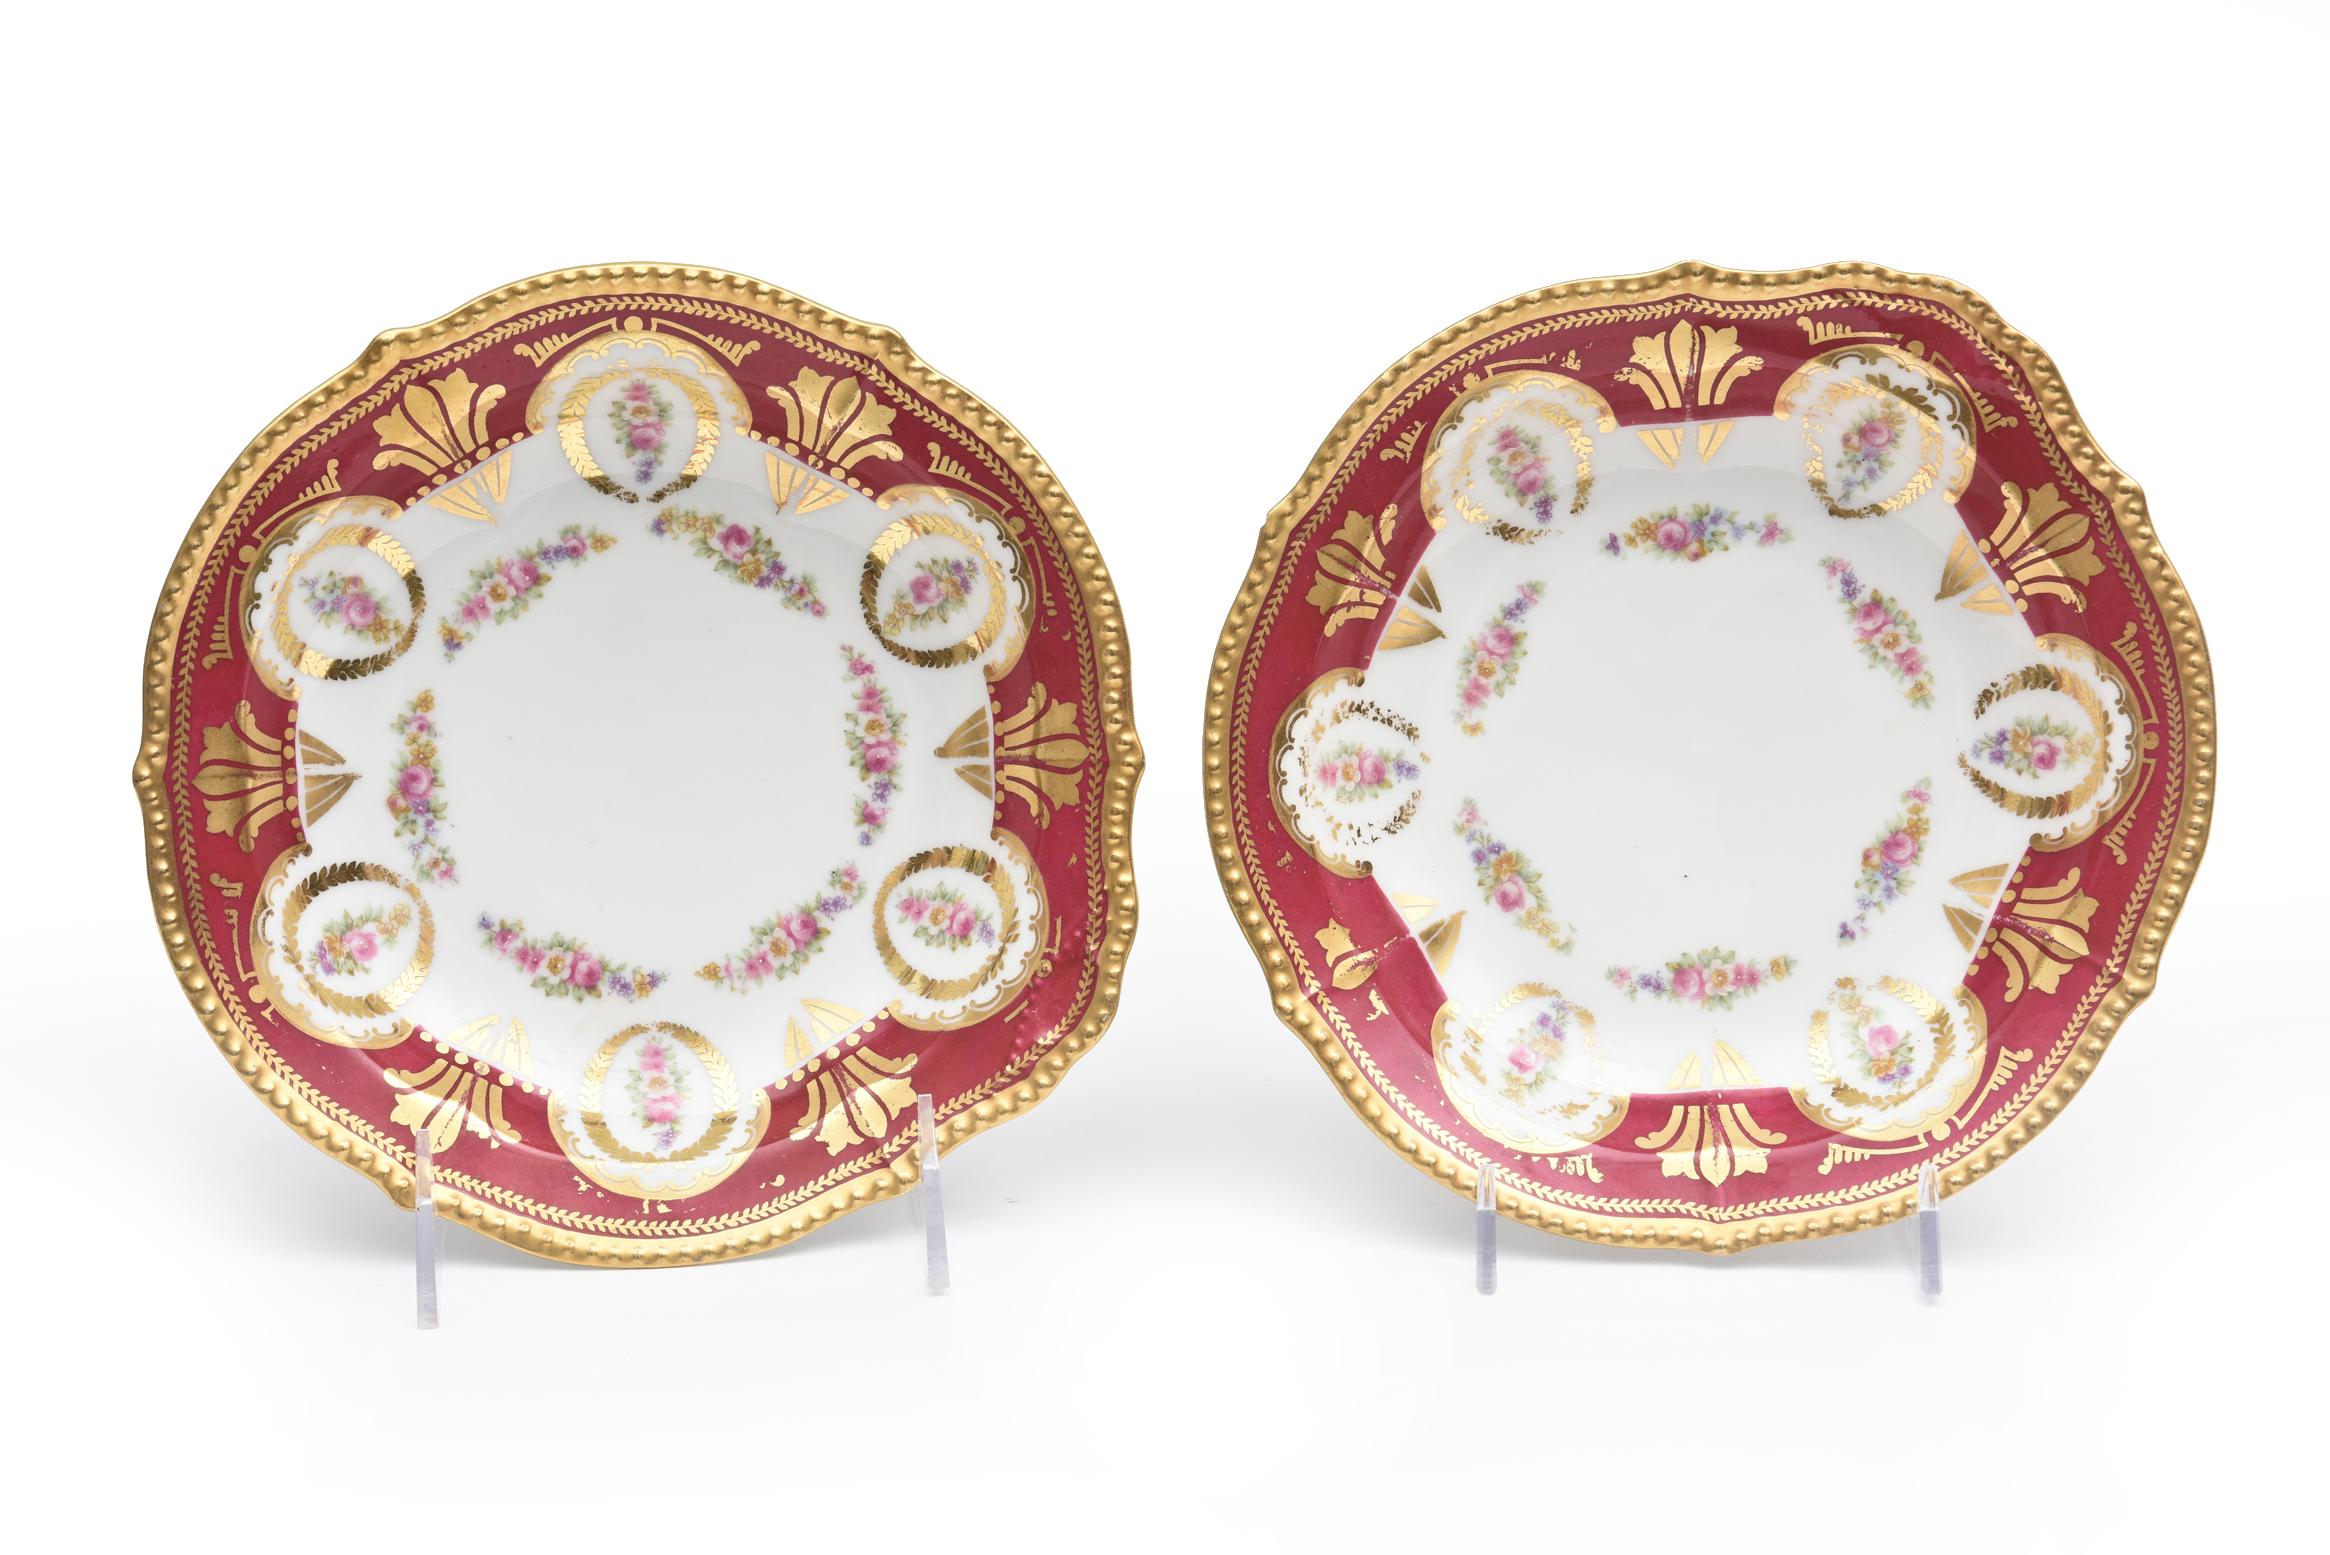 Antique Limoges, France Soup Bowls, Striking Color and Hand Painted Details In Good Condition For Sale In West Palm Beach, FL